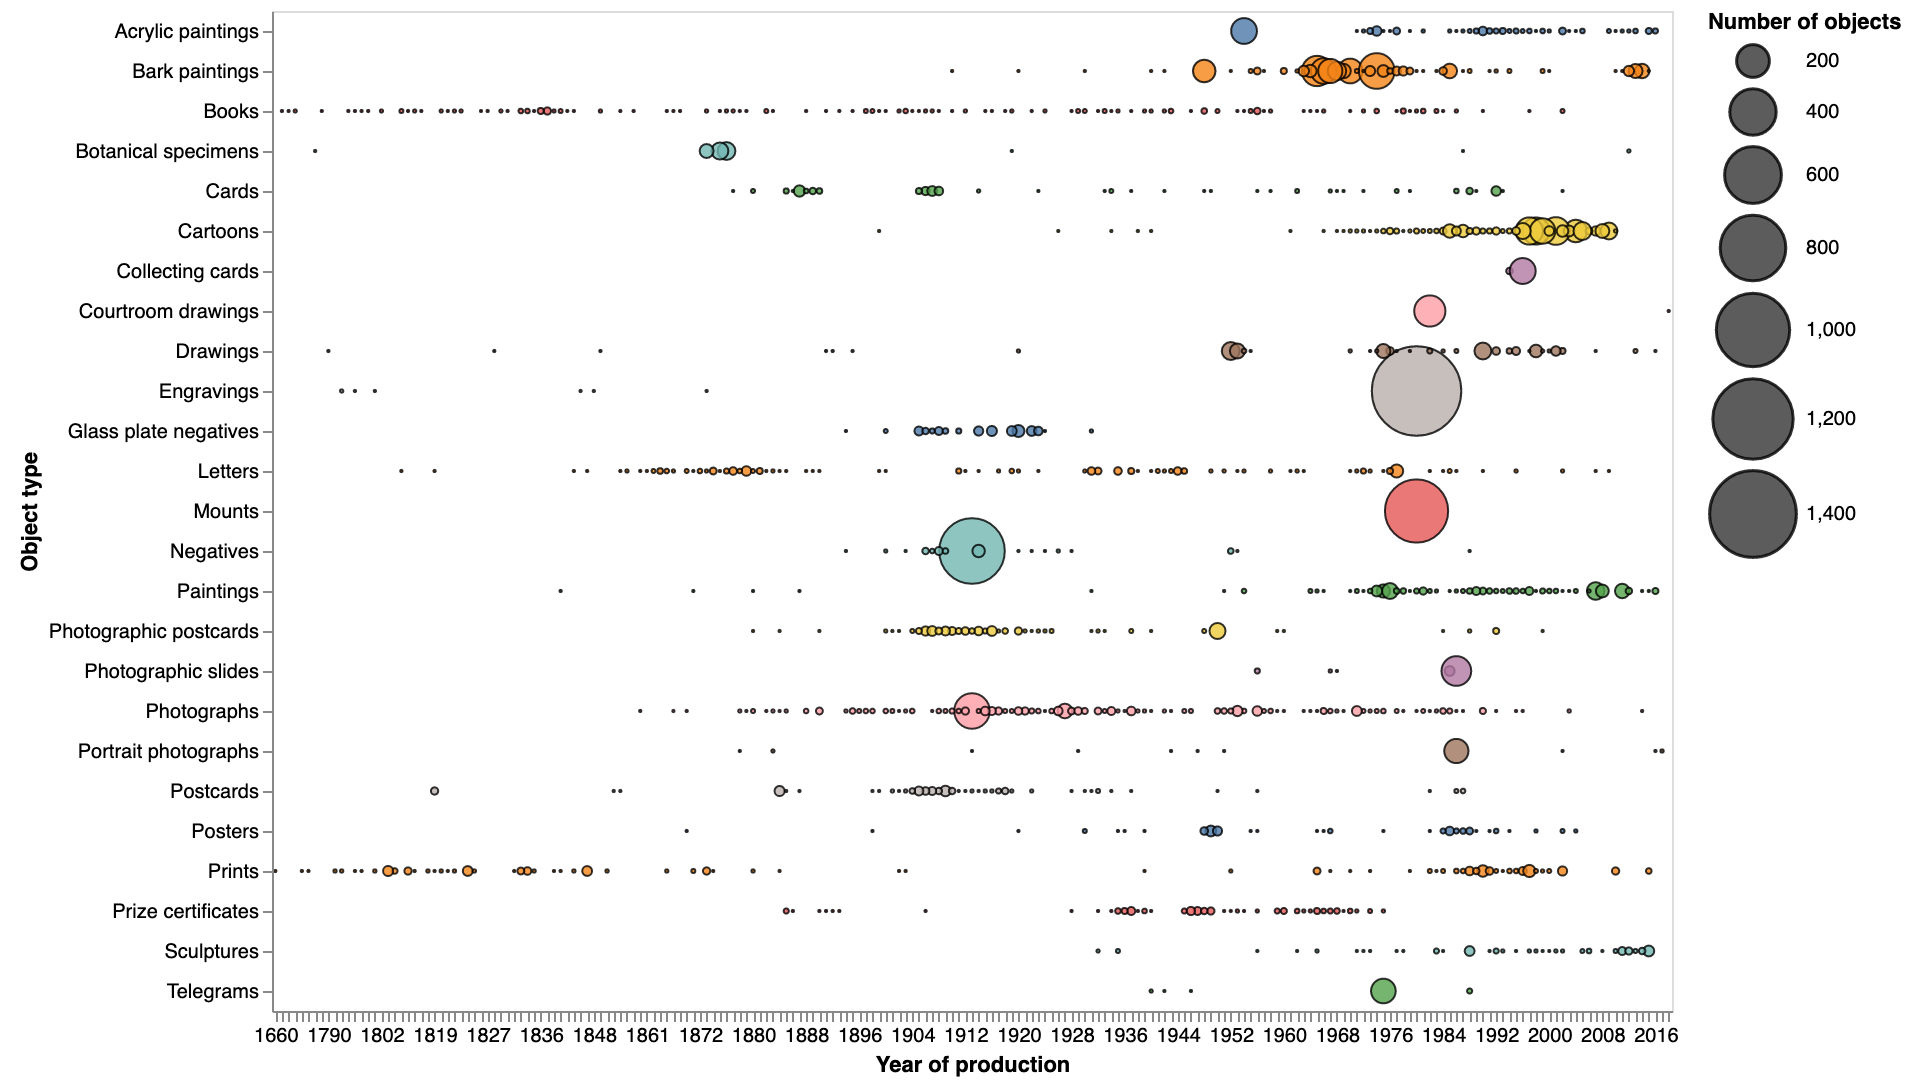 Chart showing number of object types created over time